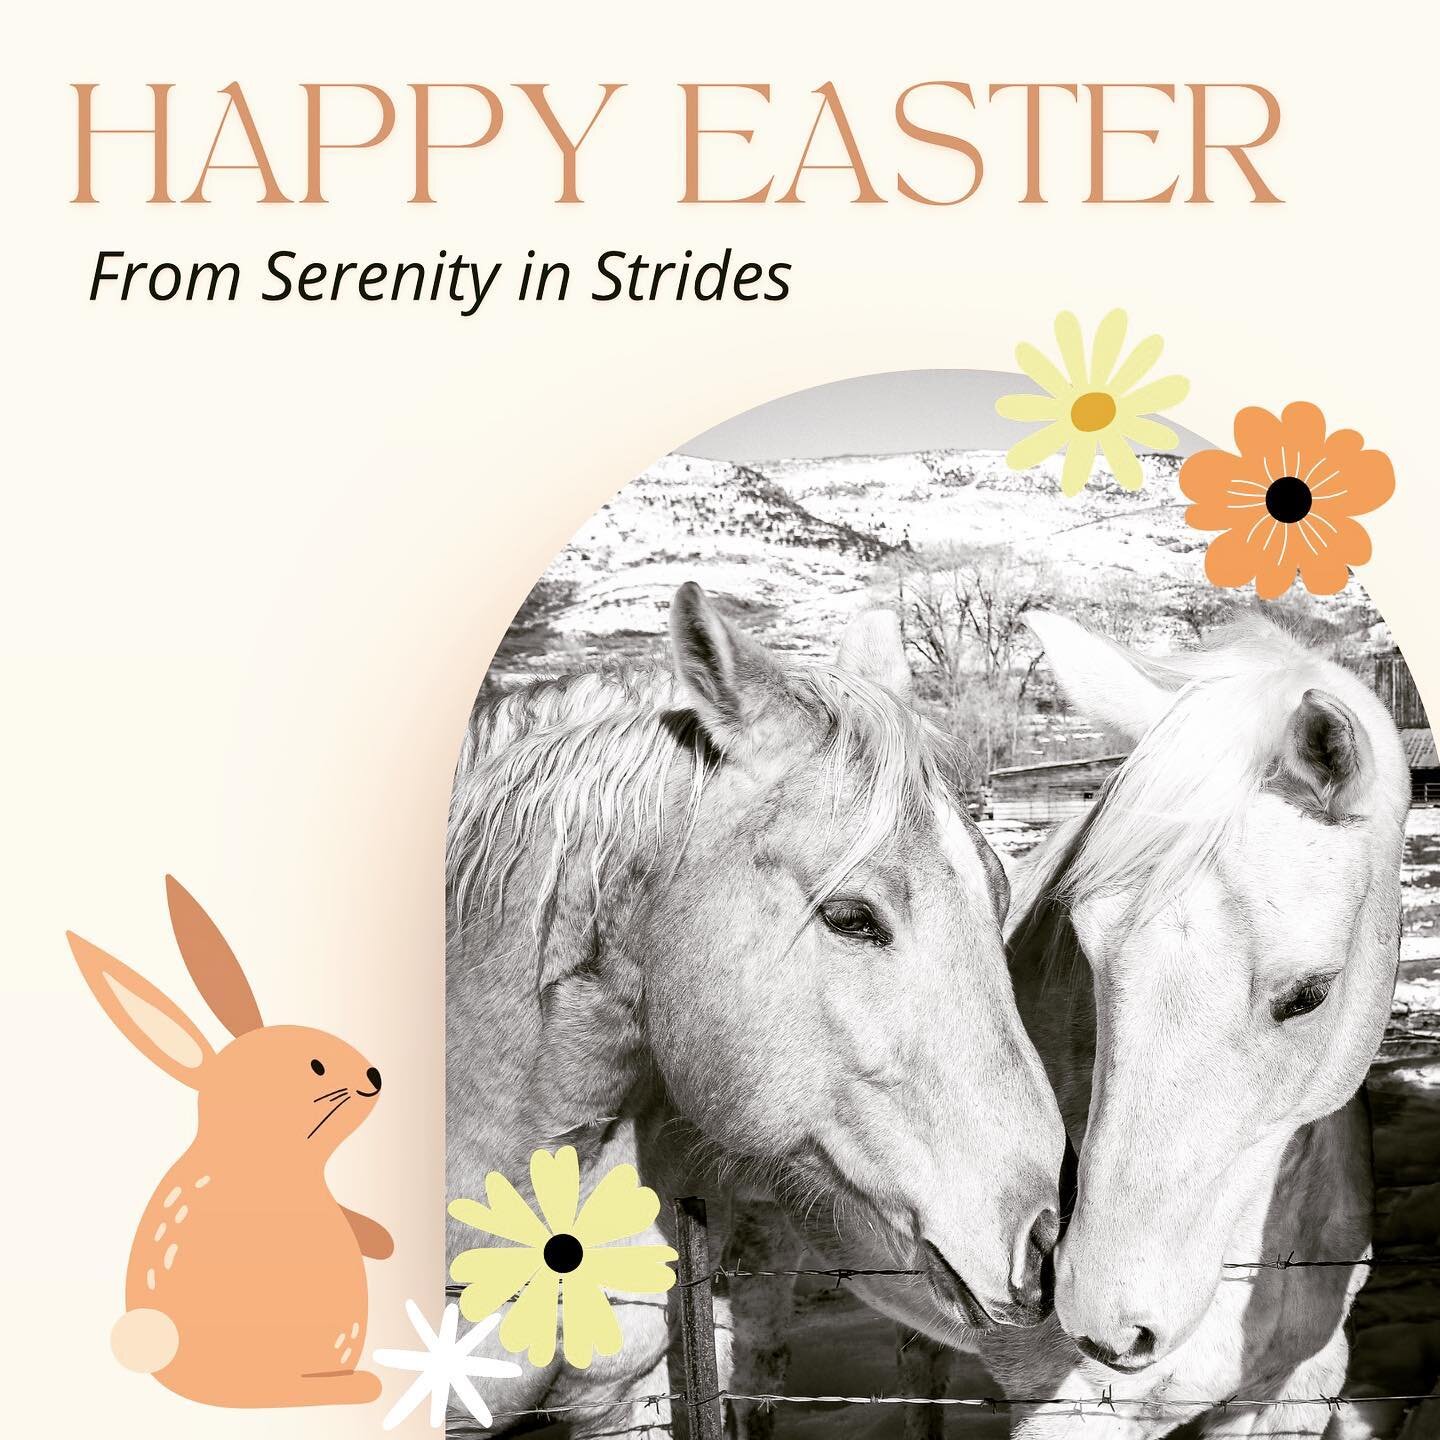 As Easter blooms around us, may you find moments of peace, joy, and renewal in the company of your loved ones. At Serenity in Strides Counseling, we celebrate the beauty of new beginnings and the serenity found in embracing positive change. Let this 